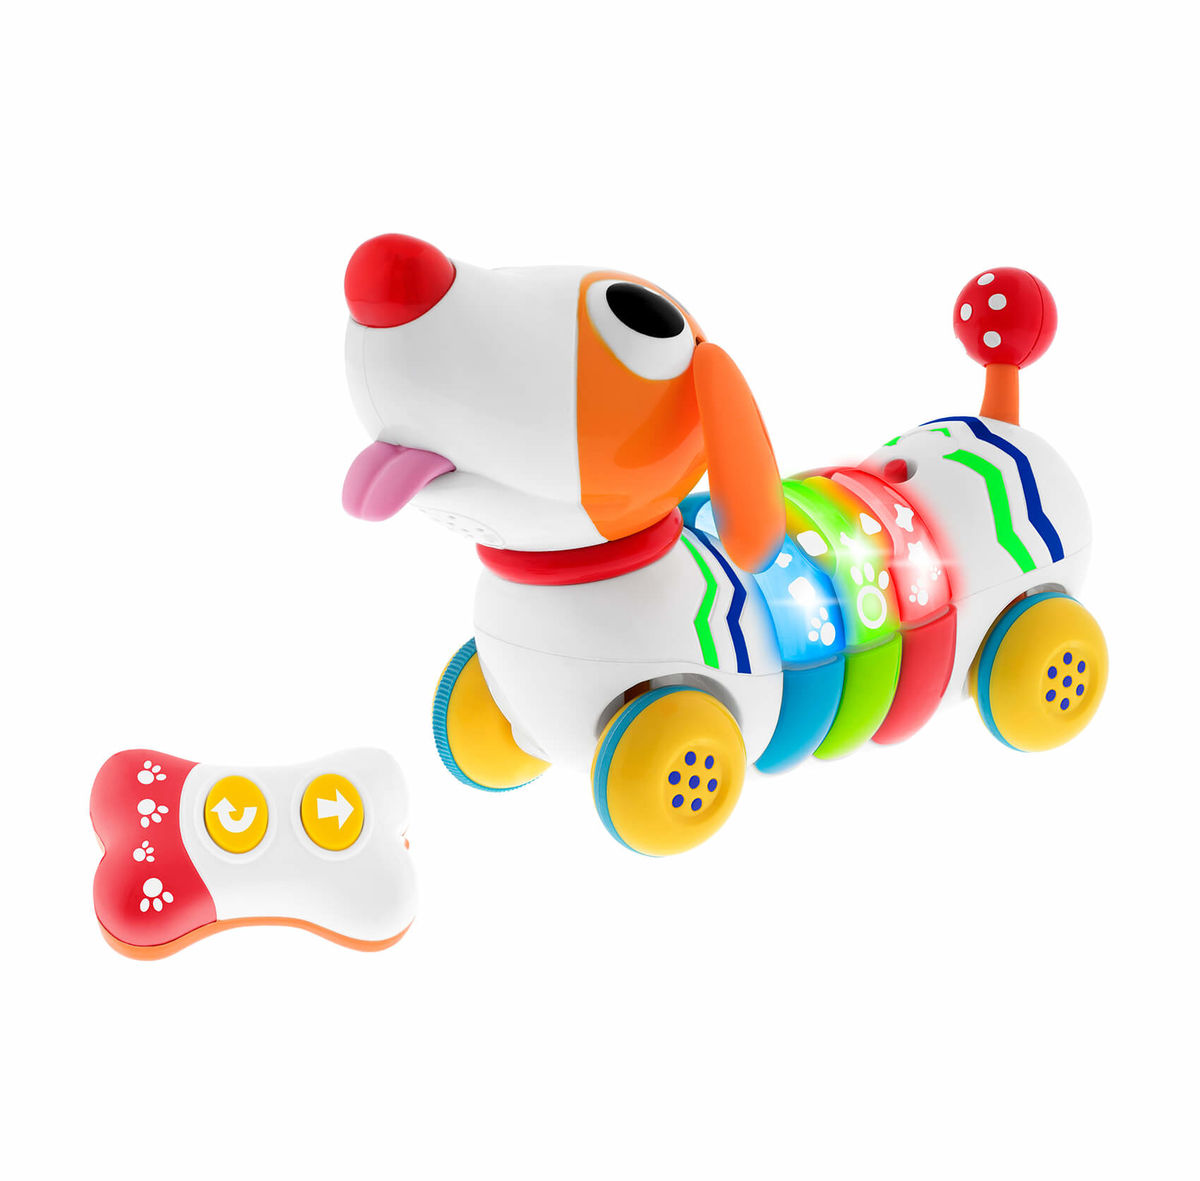 Image of Chicco Classic Dog Remi Spielzeug bei nettoshop.ch